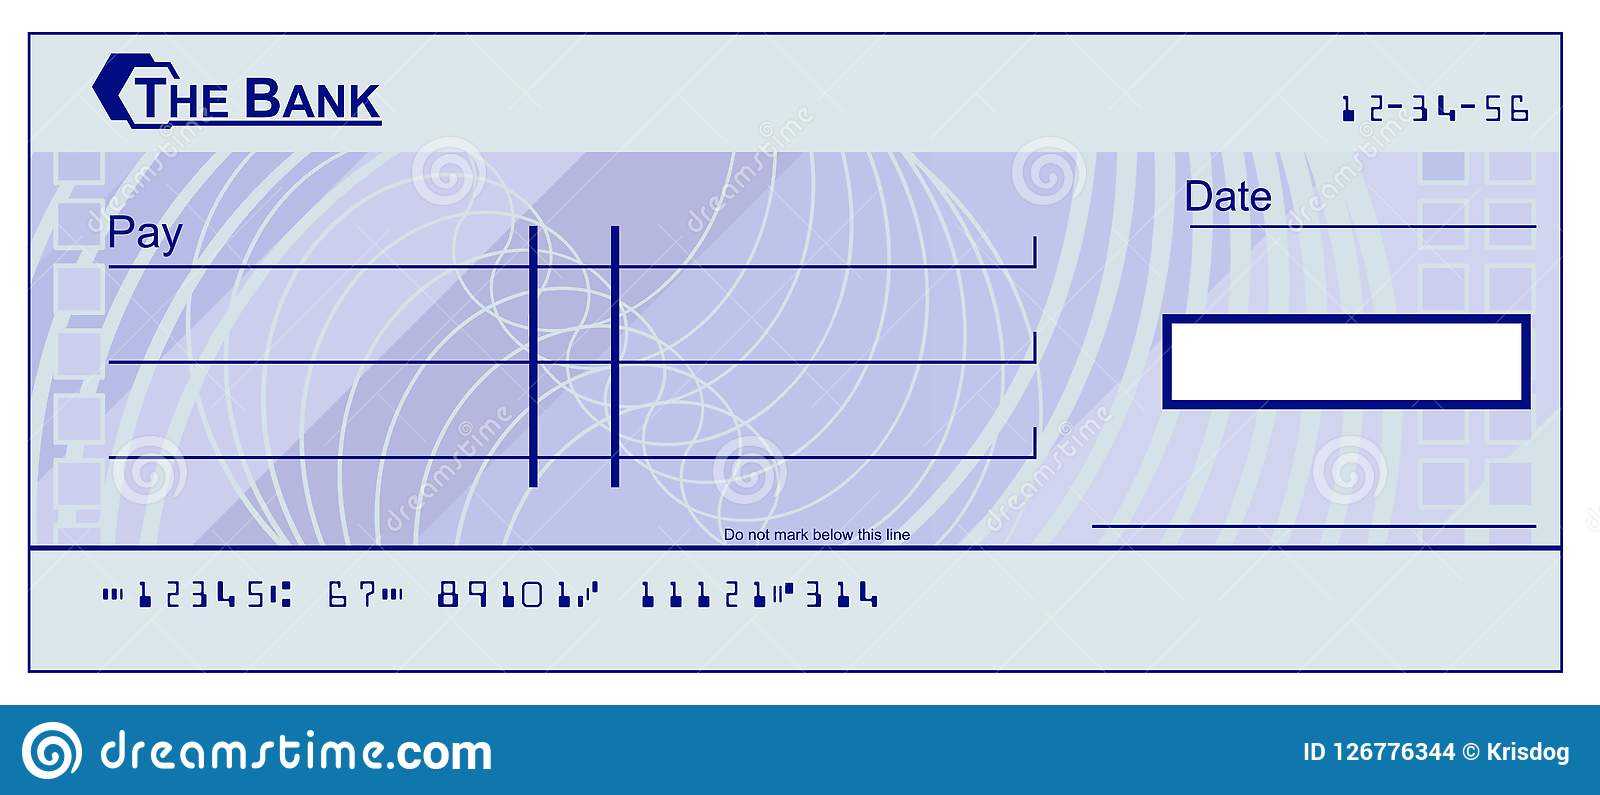 Blank Cheque Stock Vector. Illustration Of Design, Blue With Blank Cheque Template Download Free